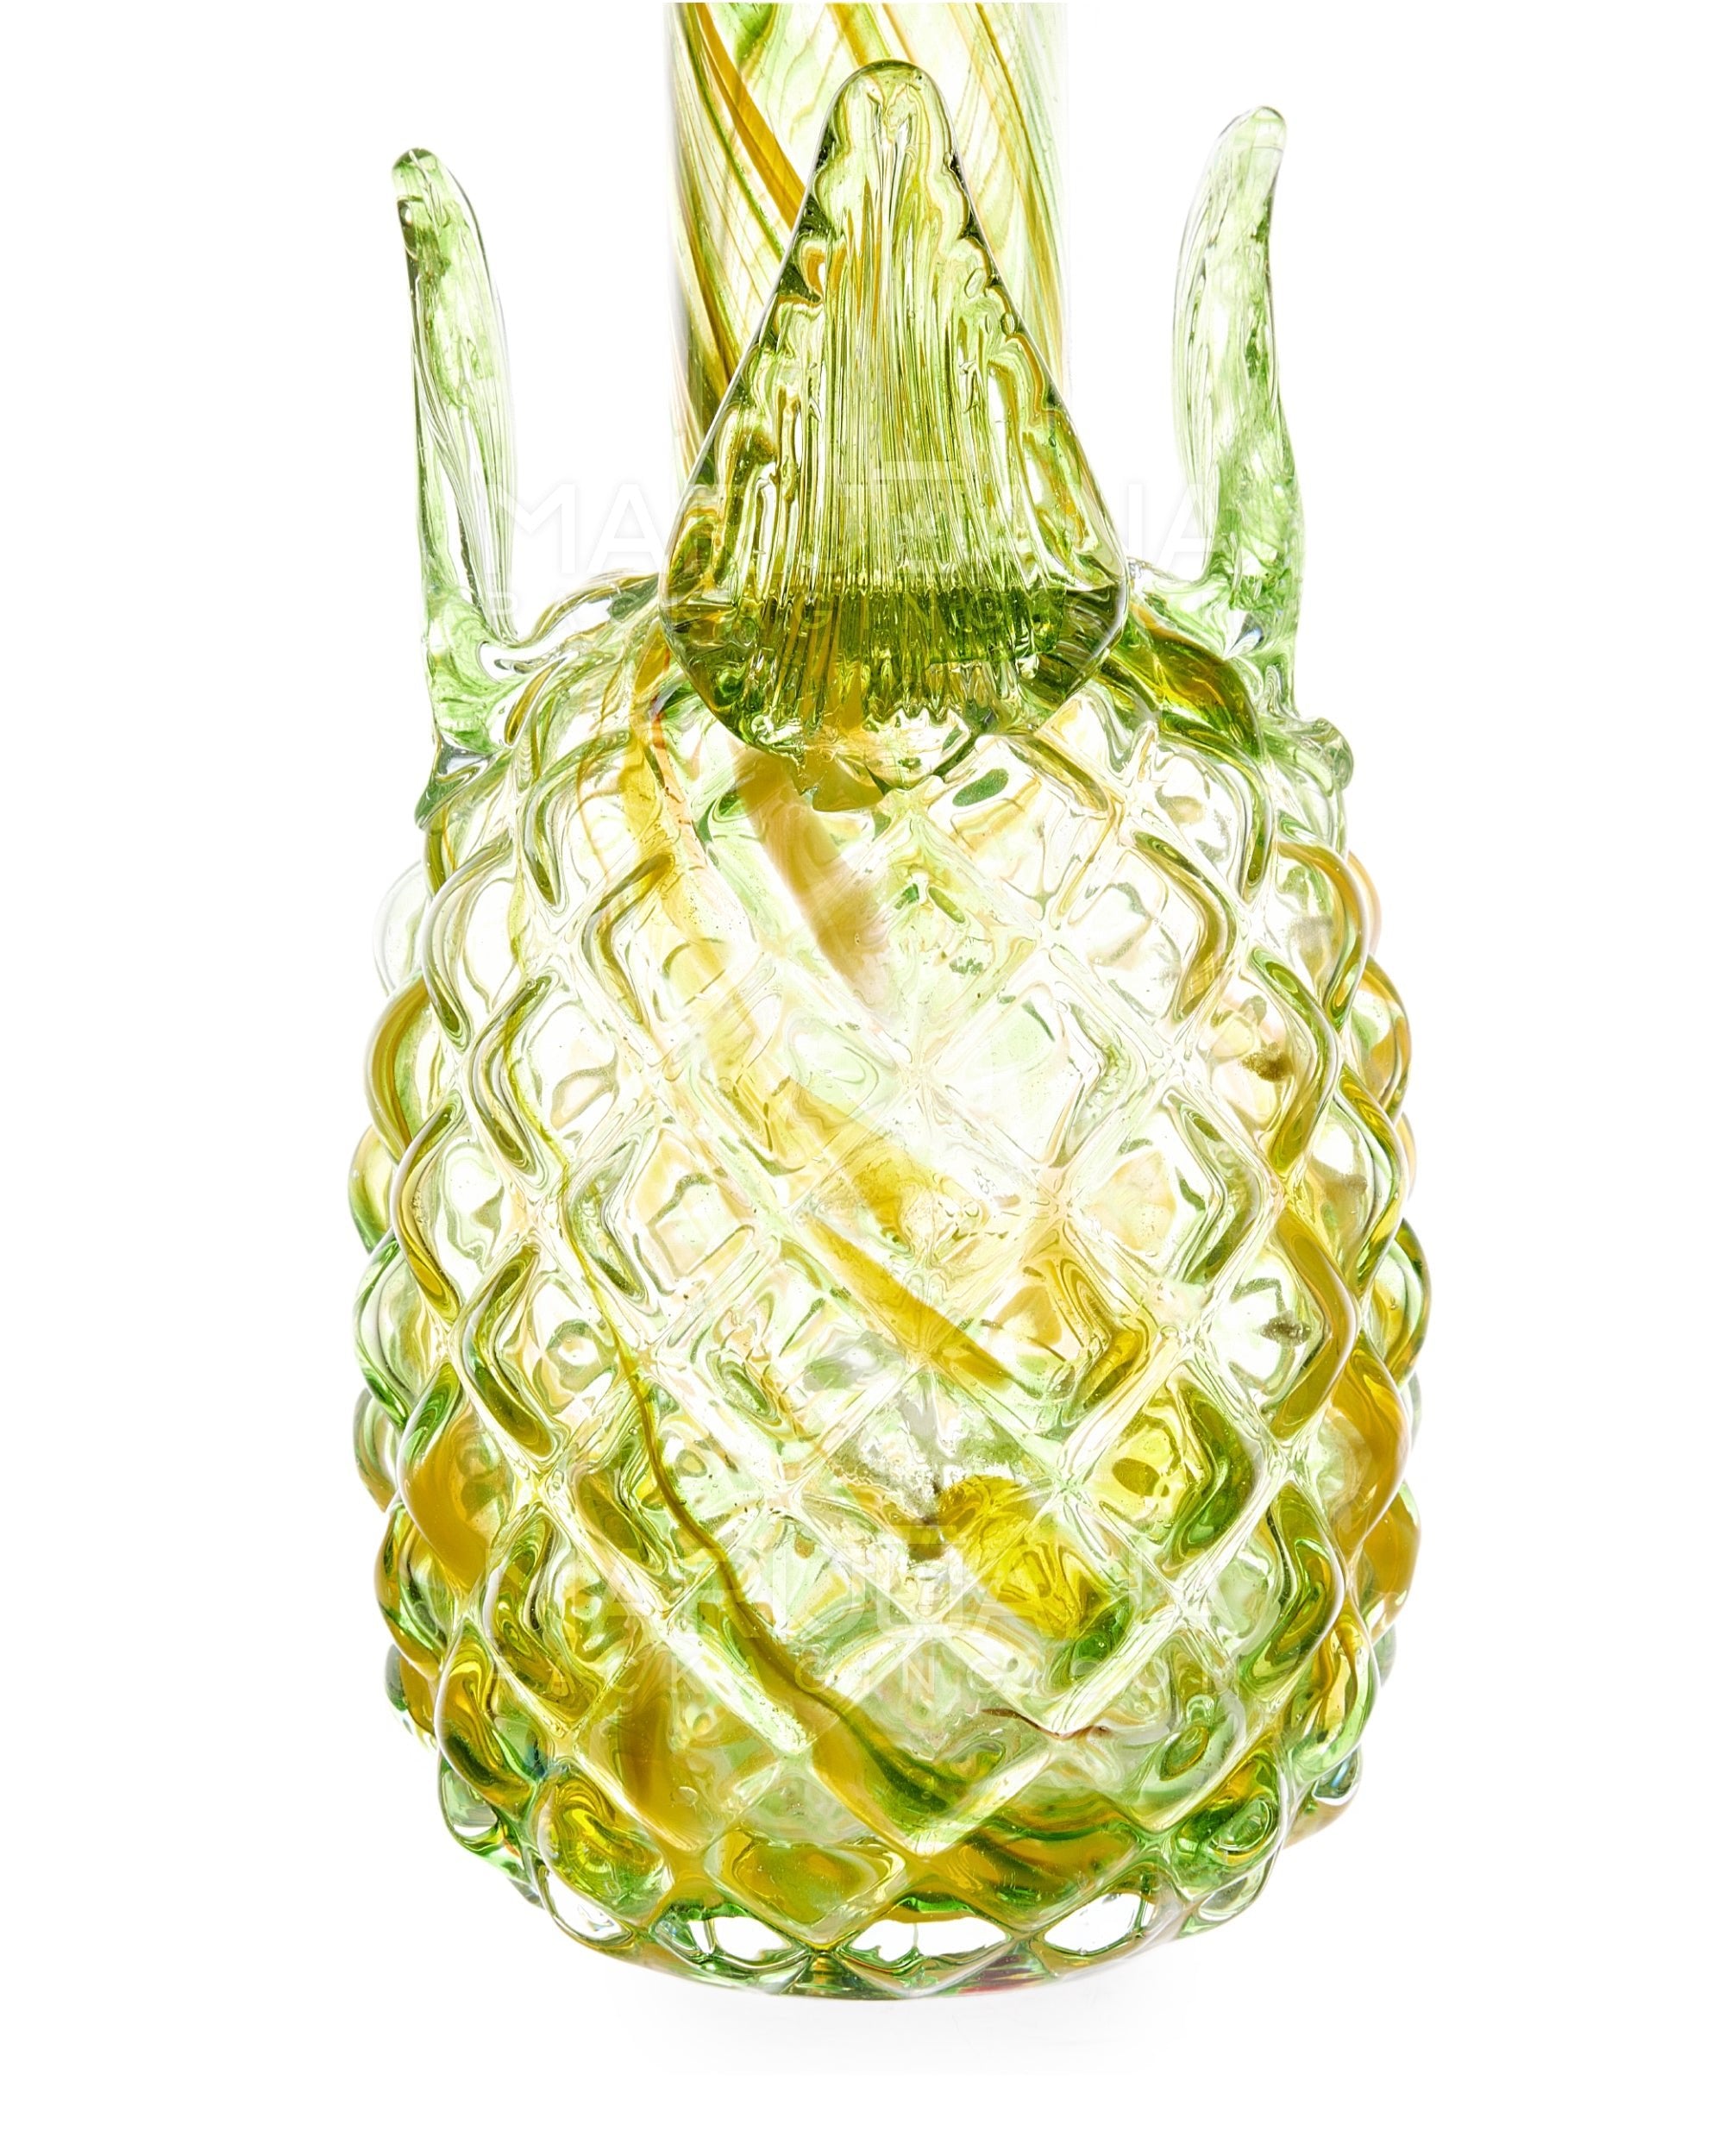 Straight Neck Color Pull Pineapple Glass Water Pipe | 14in Tall - 14mm Bowl - Yellow - 3